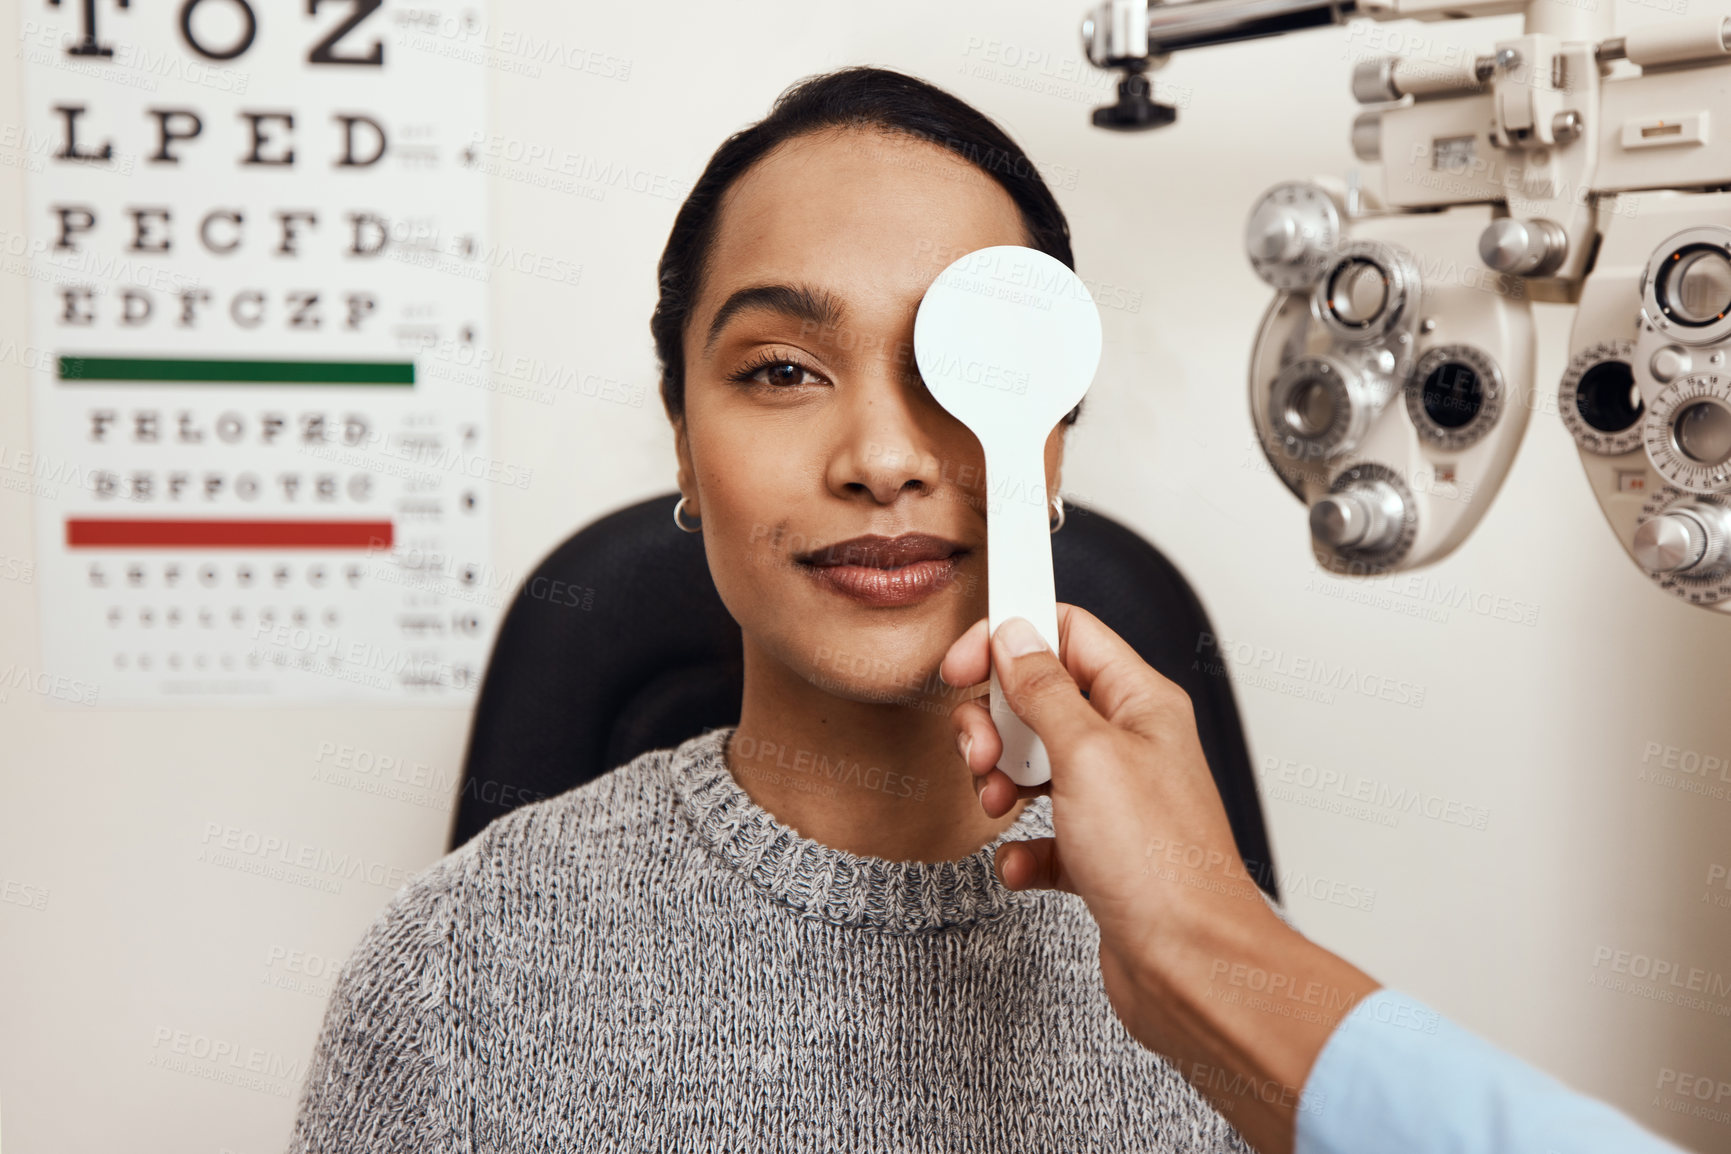 Buy stock photo Shot of an optometrist covering her patient’s eyes with an occluder during an eye exam